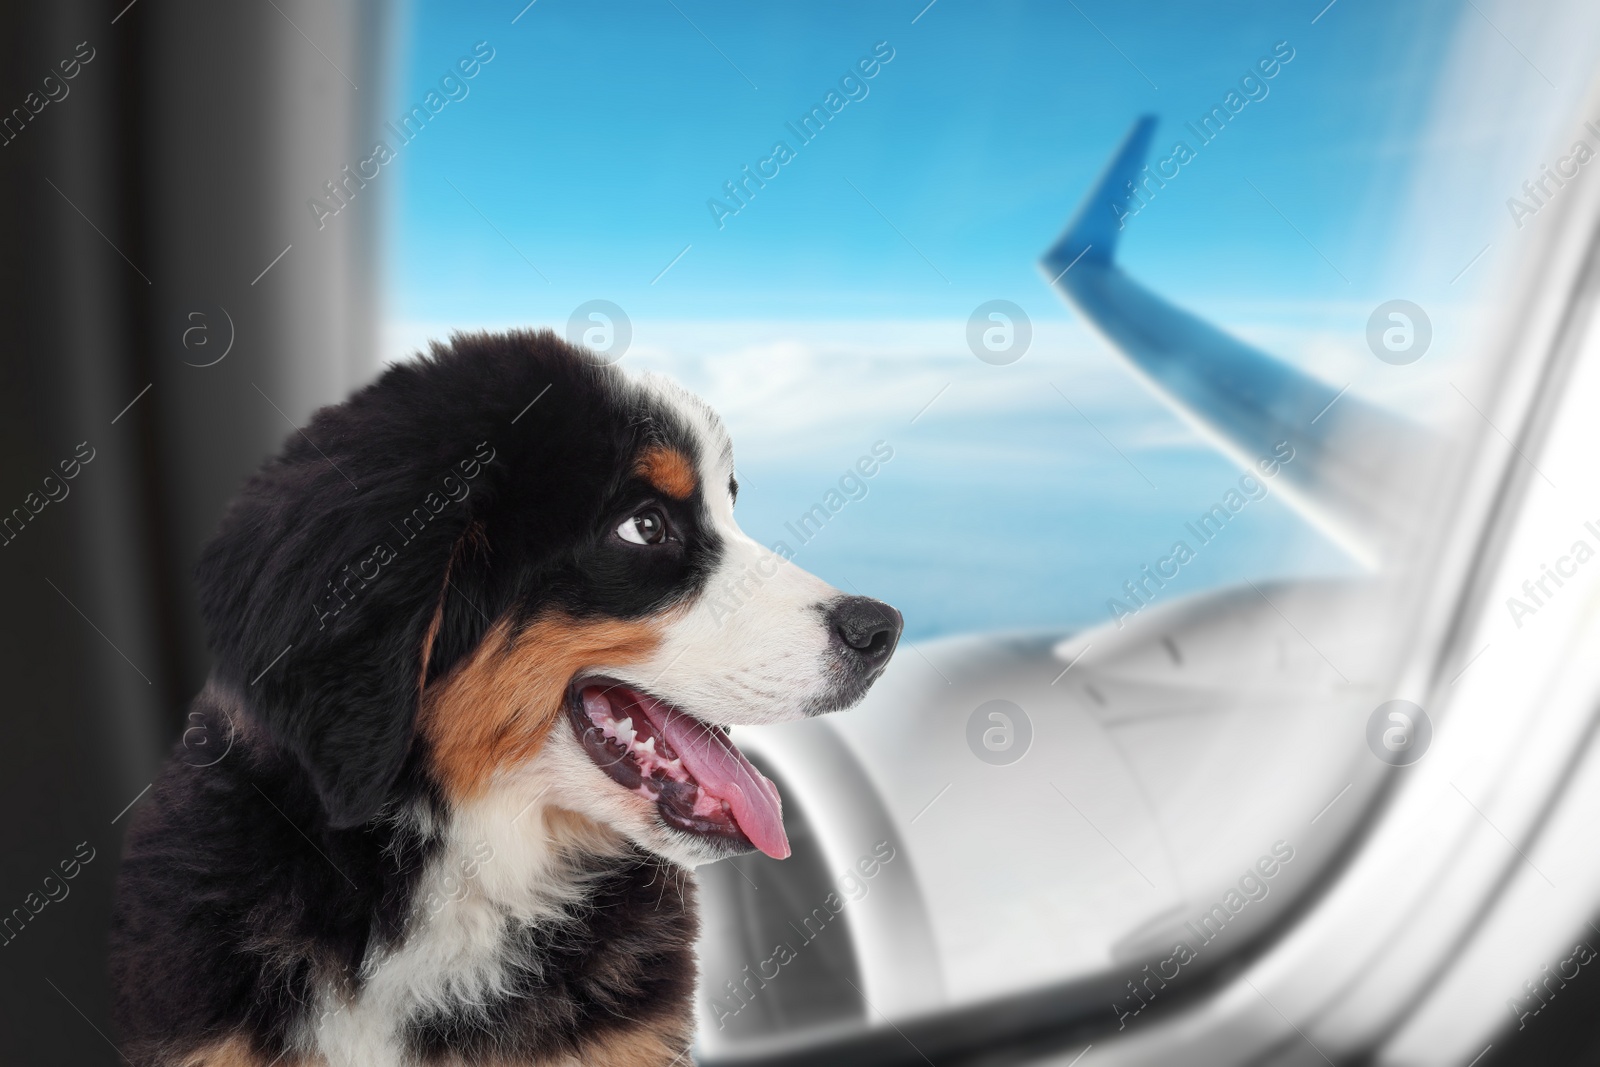 Image of Travelling with pet. Adorable Bernese Mountain Dog puppy near window in airplane